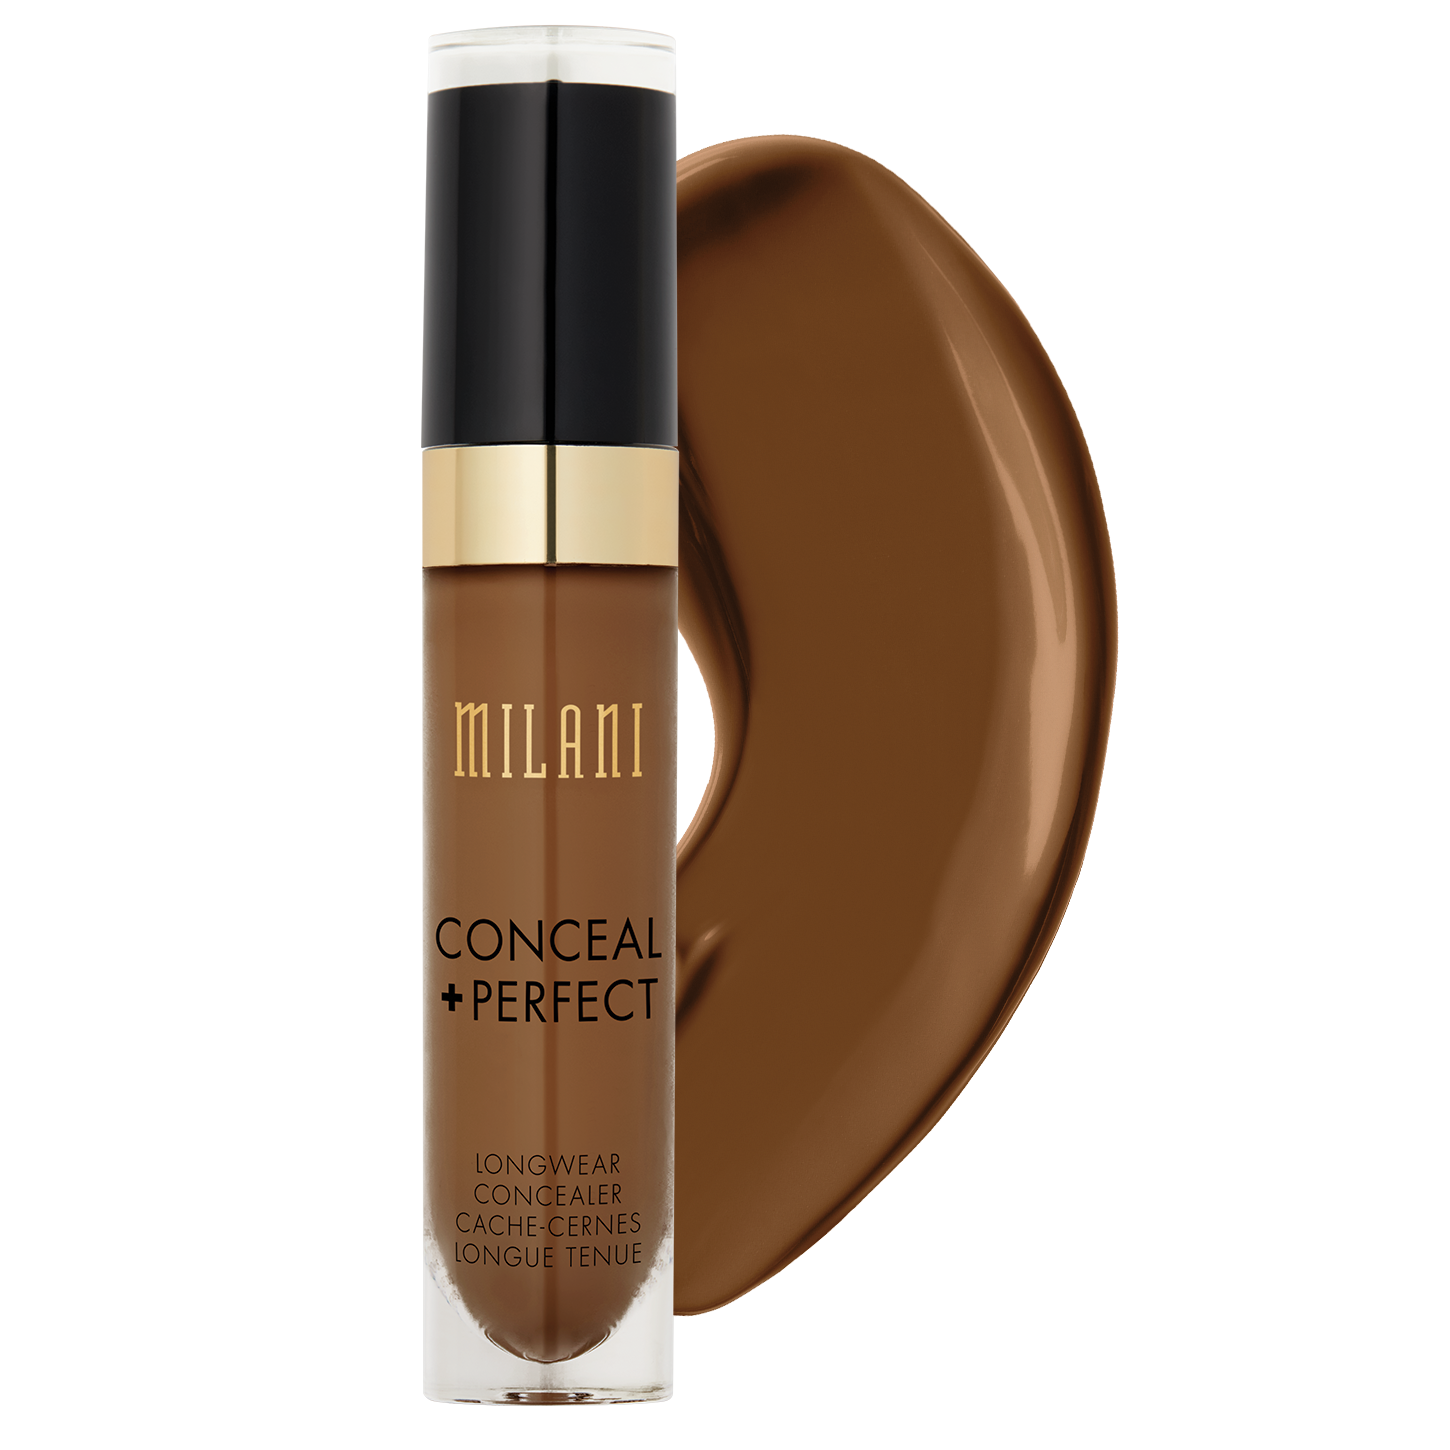 MILANI Conceal + Perfect Long-Wear Concealer - Cool Toffee #180